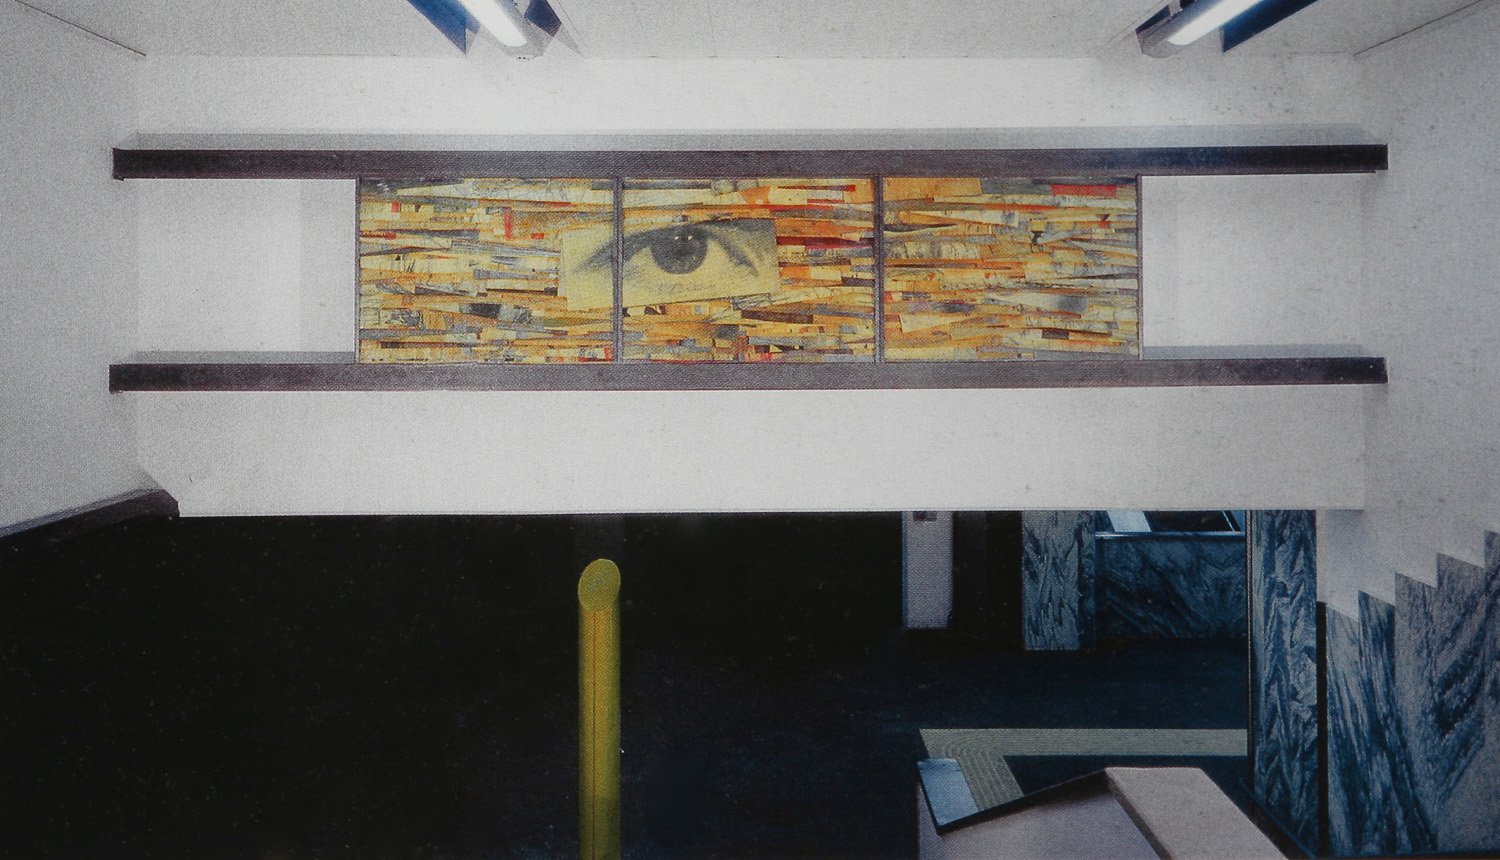 2. Untitled, 2001, photographic emulsion and mixed media on paper, steel and glass, 110 x 580 cm .jpg